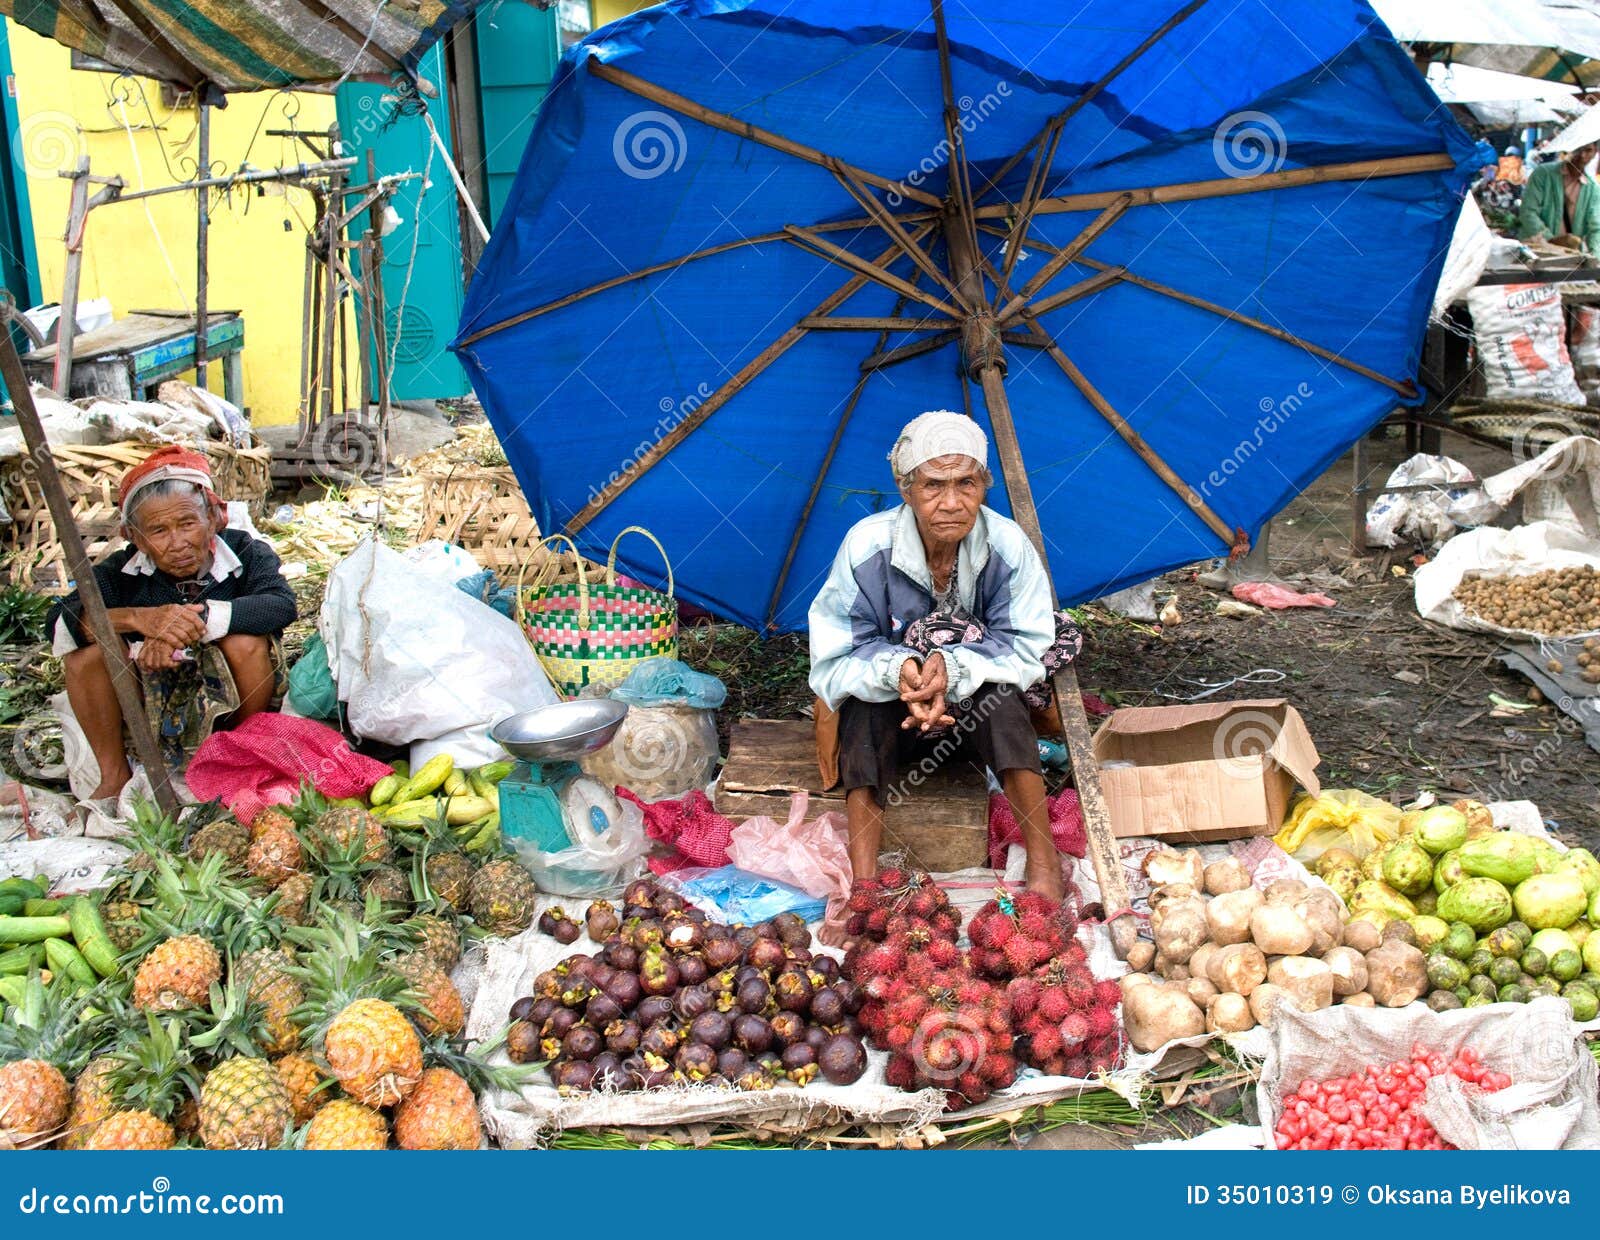 Download this Indonesia Aug Local Women Sell Vegetable The Market picture